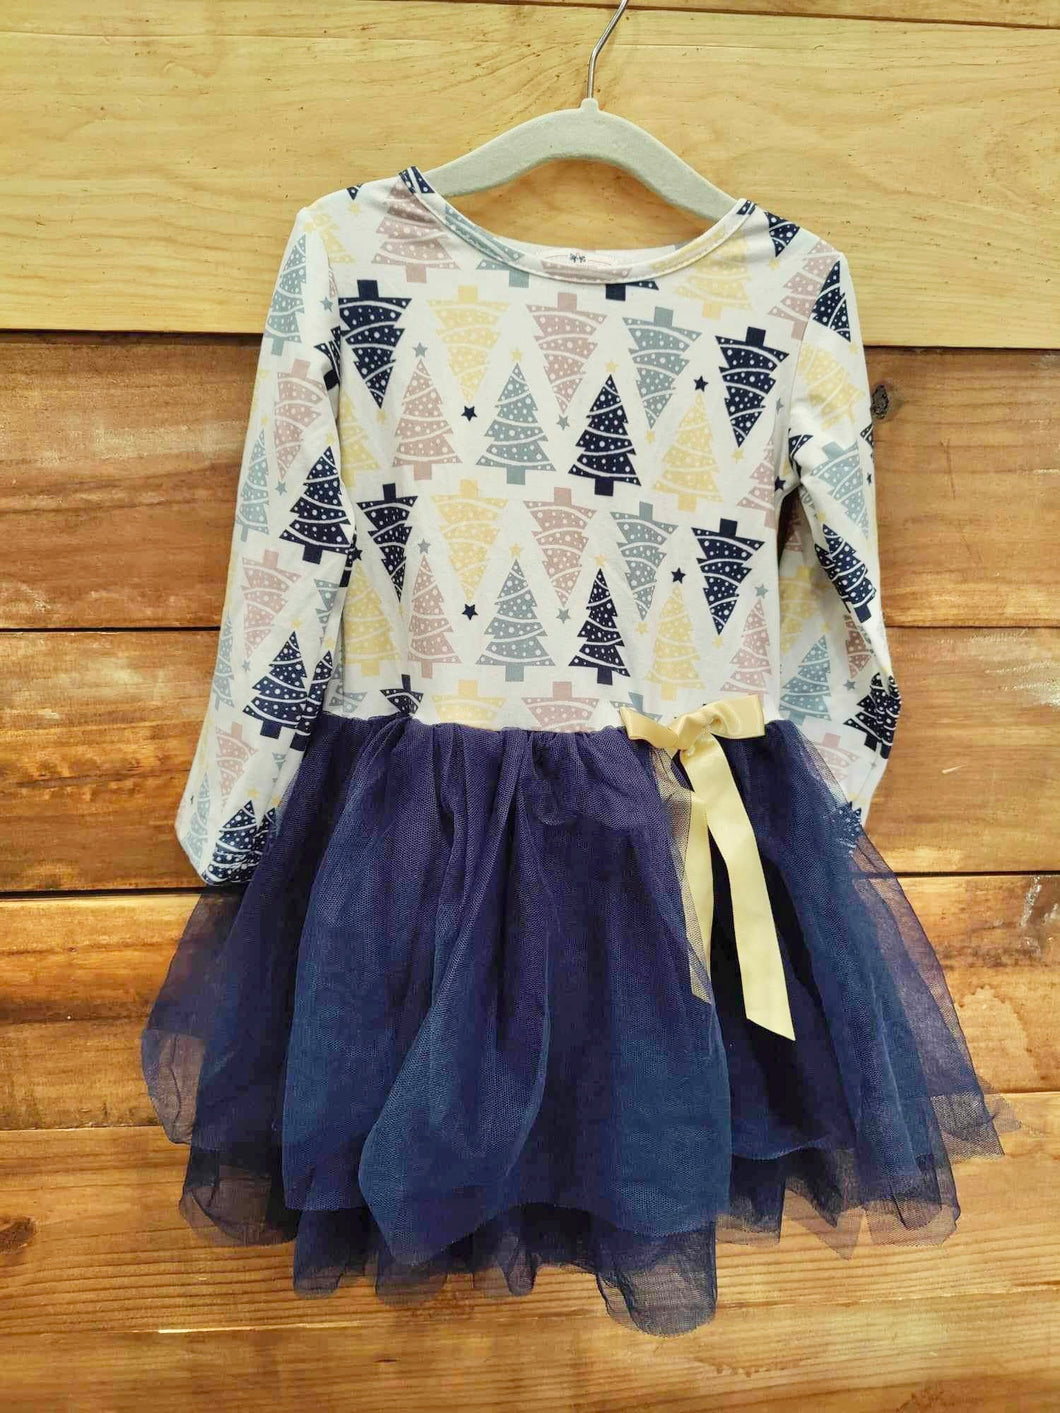 Pete + Lucy Trees Dress Size 2T